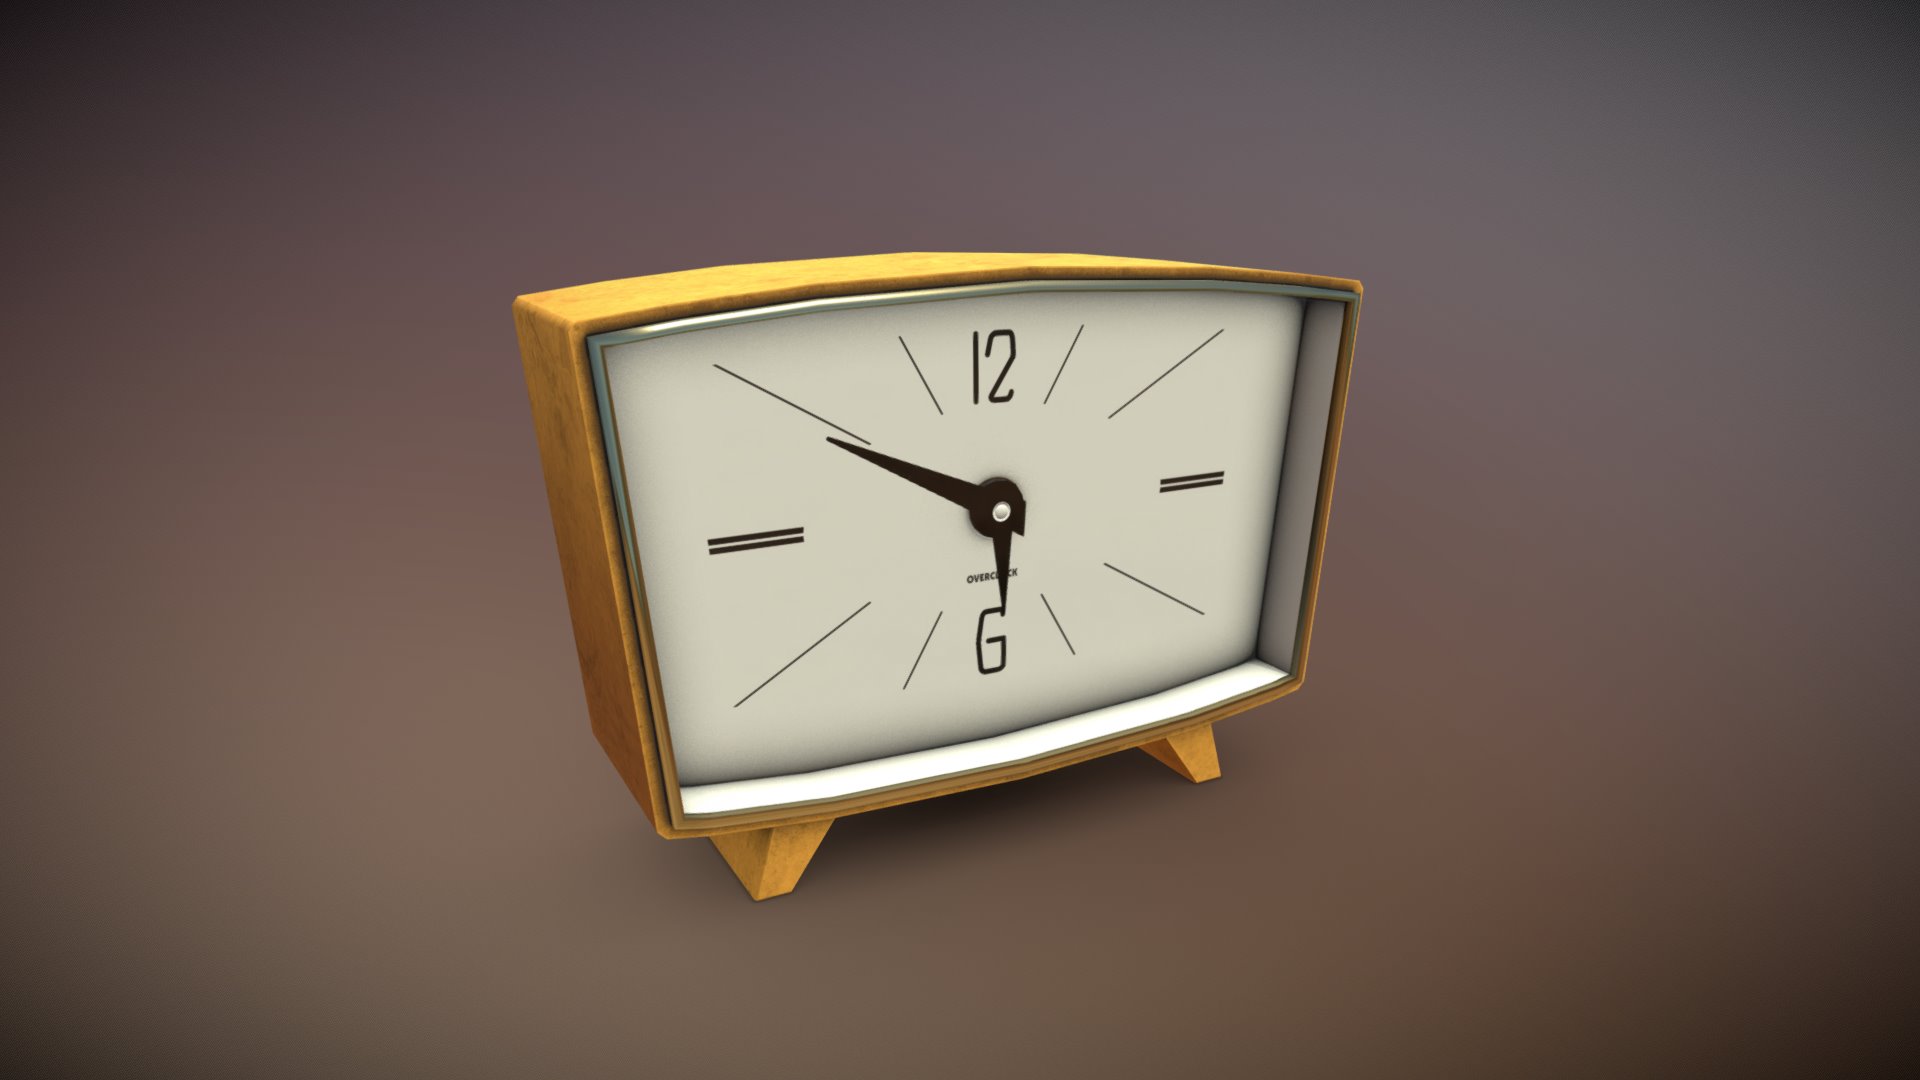 3D model Desktop clock 12 of 20 - This is a 3D model of the Desktop clock 12 of 20. The 3D model is about a clock on a wall.